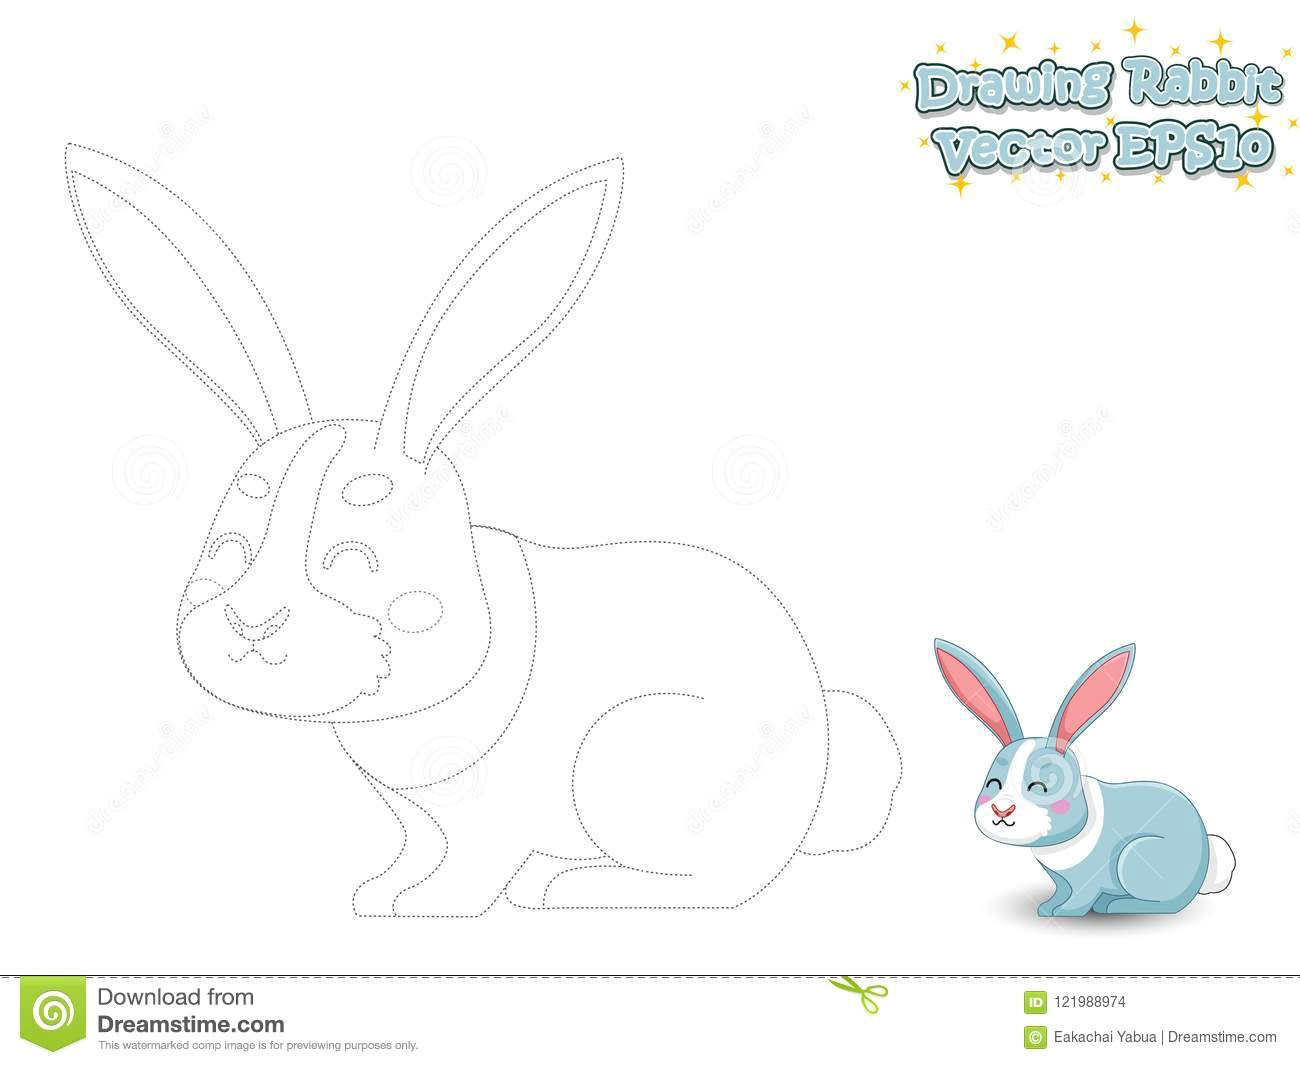 Drawing A Cute Bunny Drawing and Paint Cute Cartoon Rabbit Educational Game for Kids